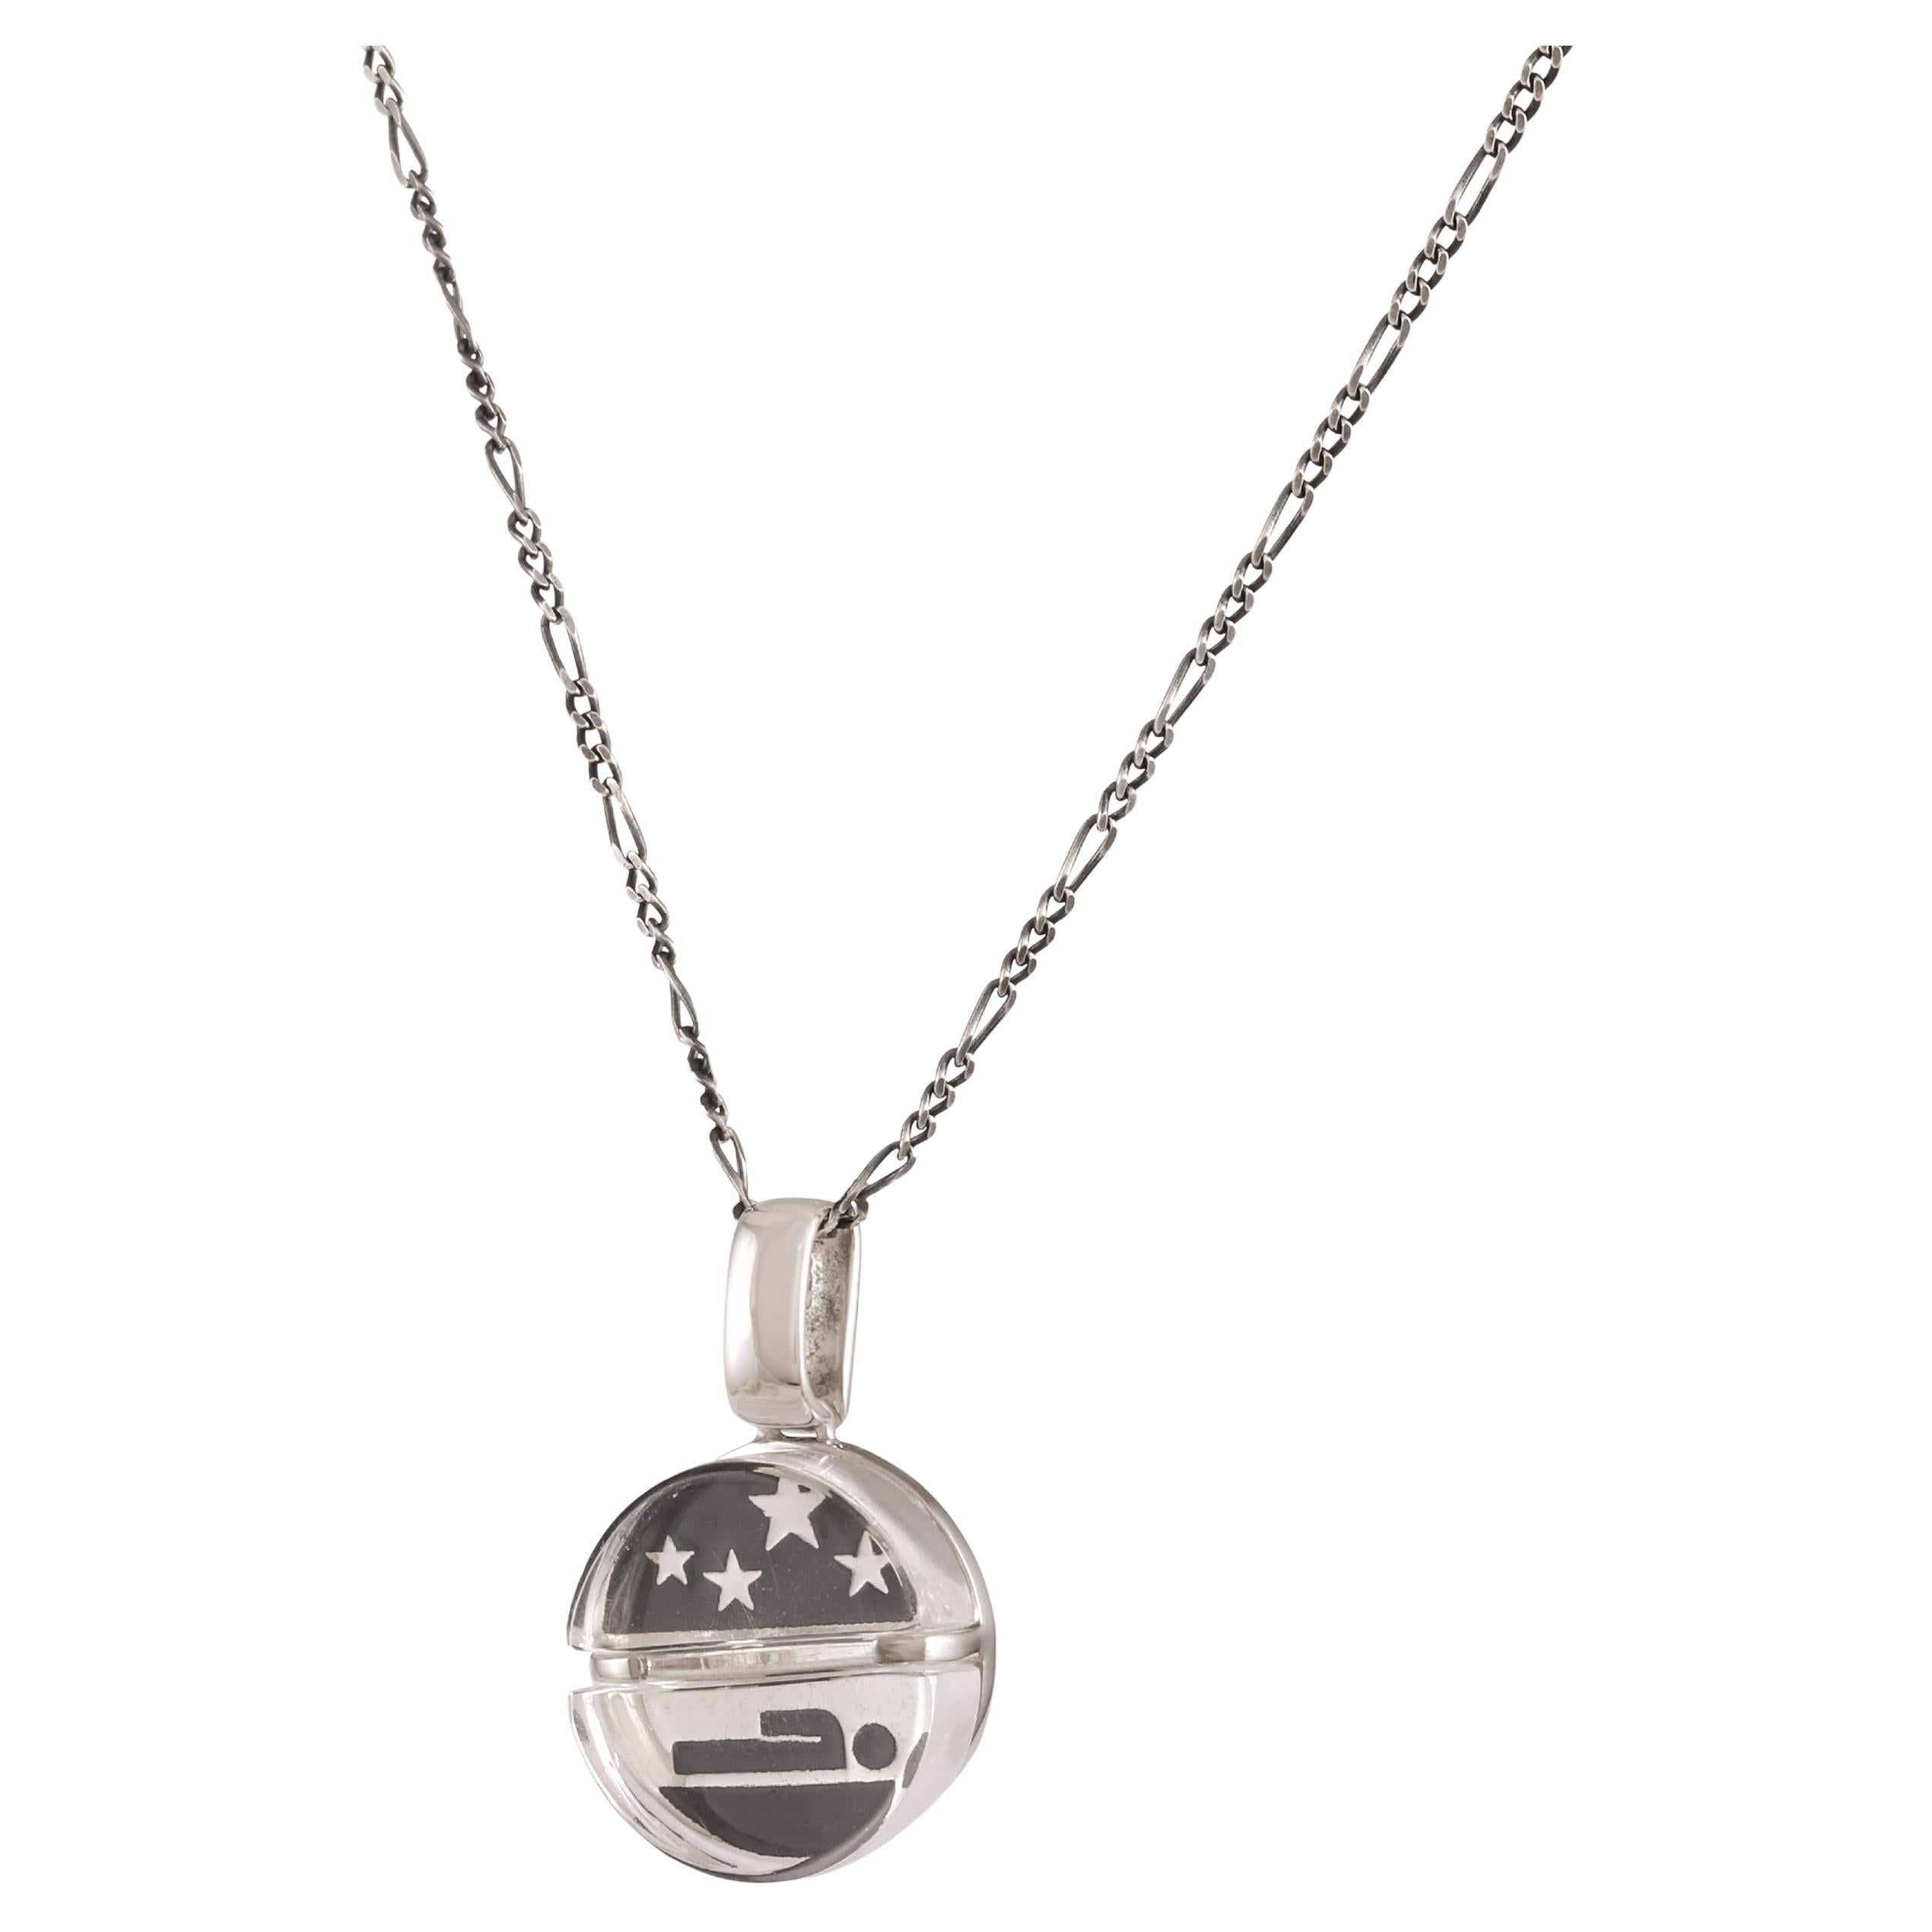 Tichu Sleep Pill Pendant & Chain in Sterling Silver & Crystal in Silver Finish 